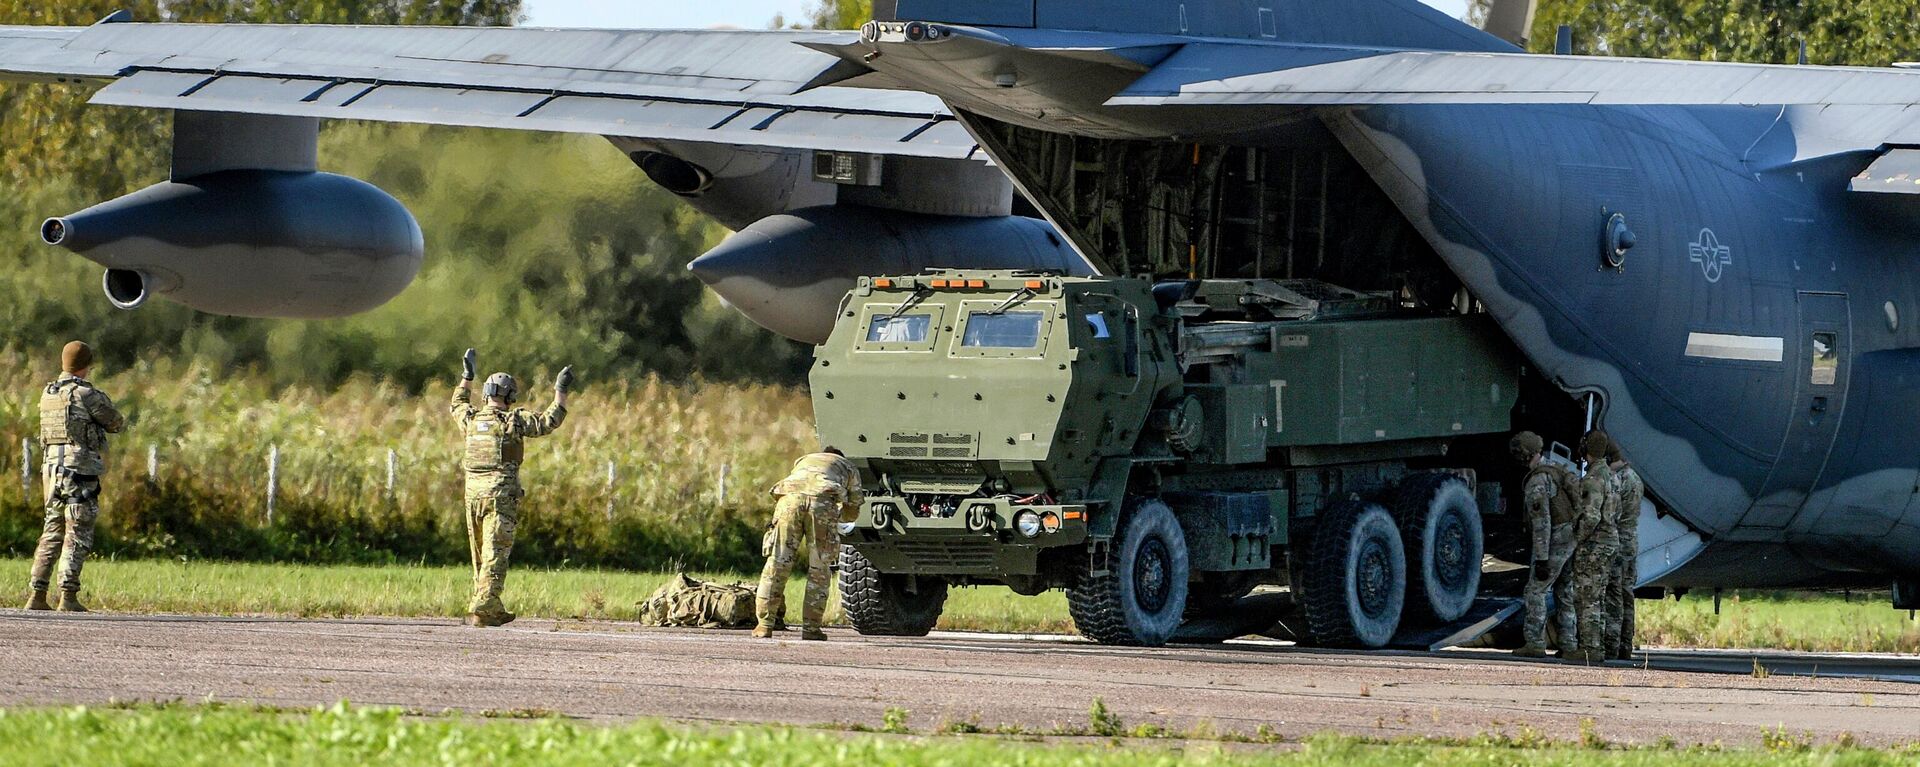 Soldiers load a High-Mobility Artillery Rocket System (HIMARS ) from a US Special Operations MC-130J aircraft during military exercises at Spilve Airport in Riga, Latvia, on Sept. 26, 2022. - Sputnik International, 1920, 06.01.2023